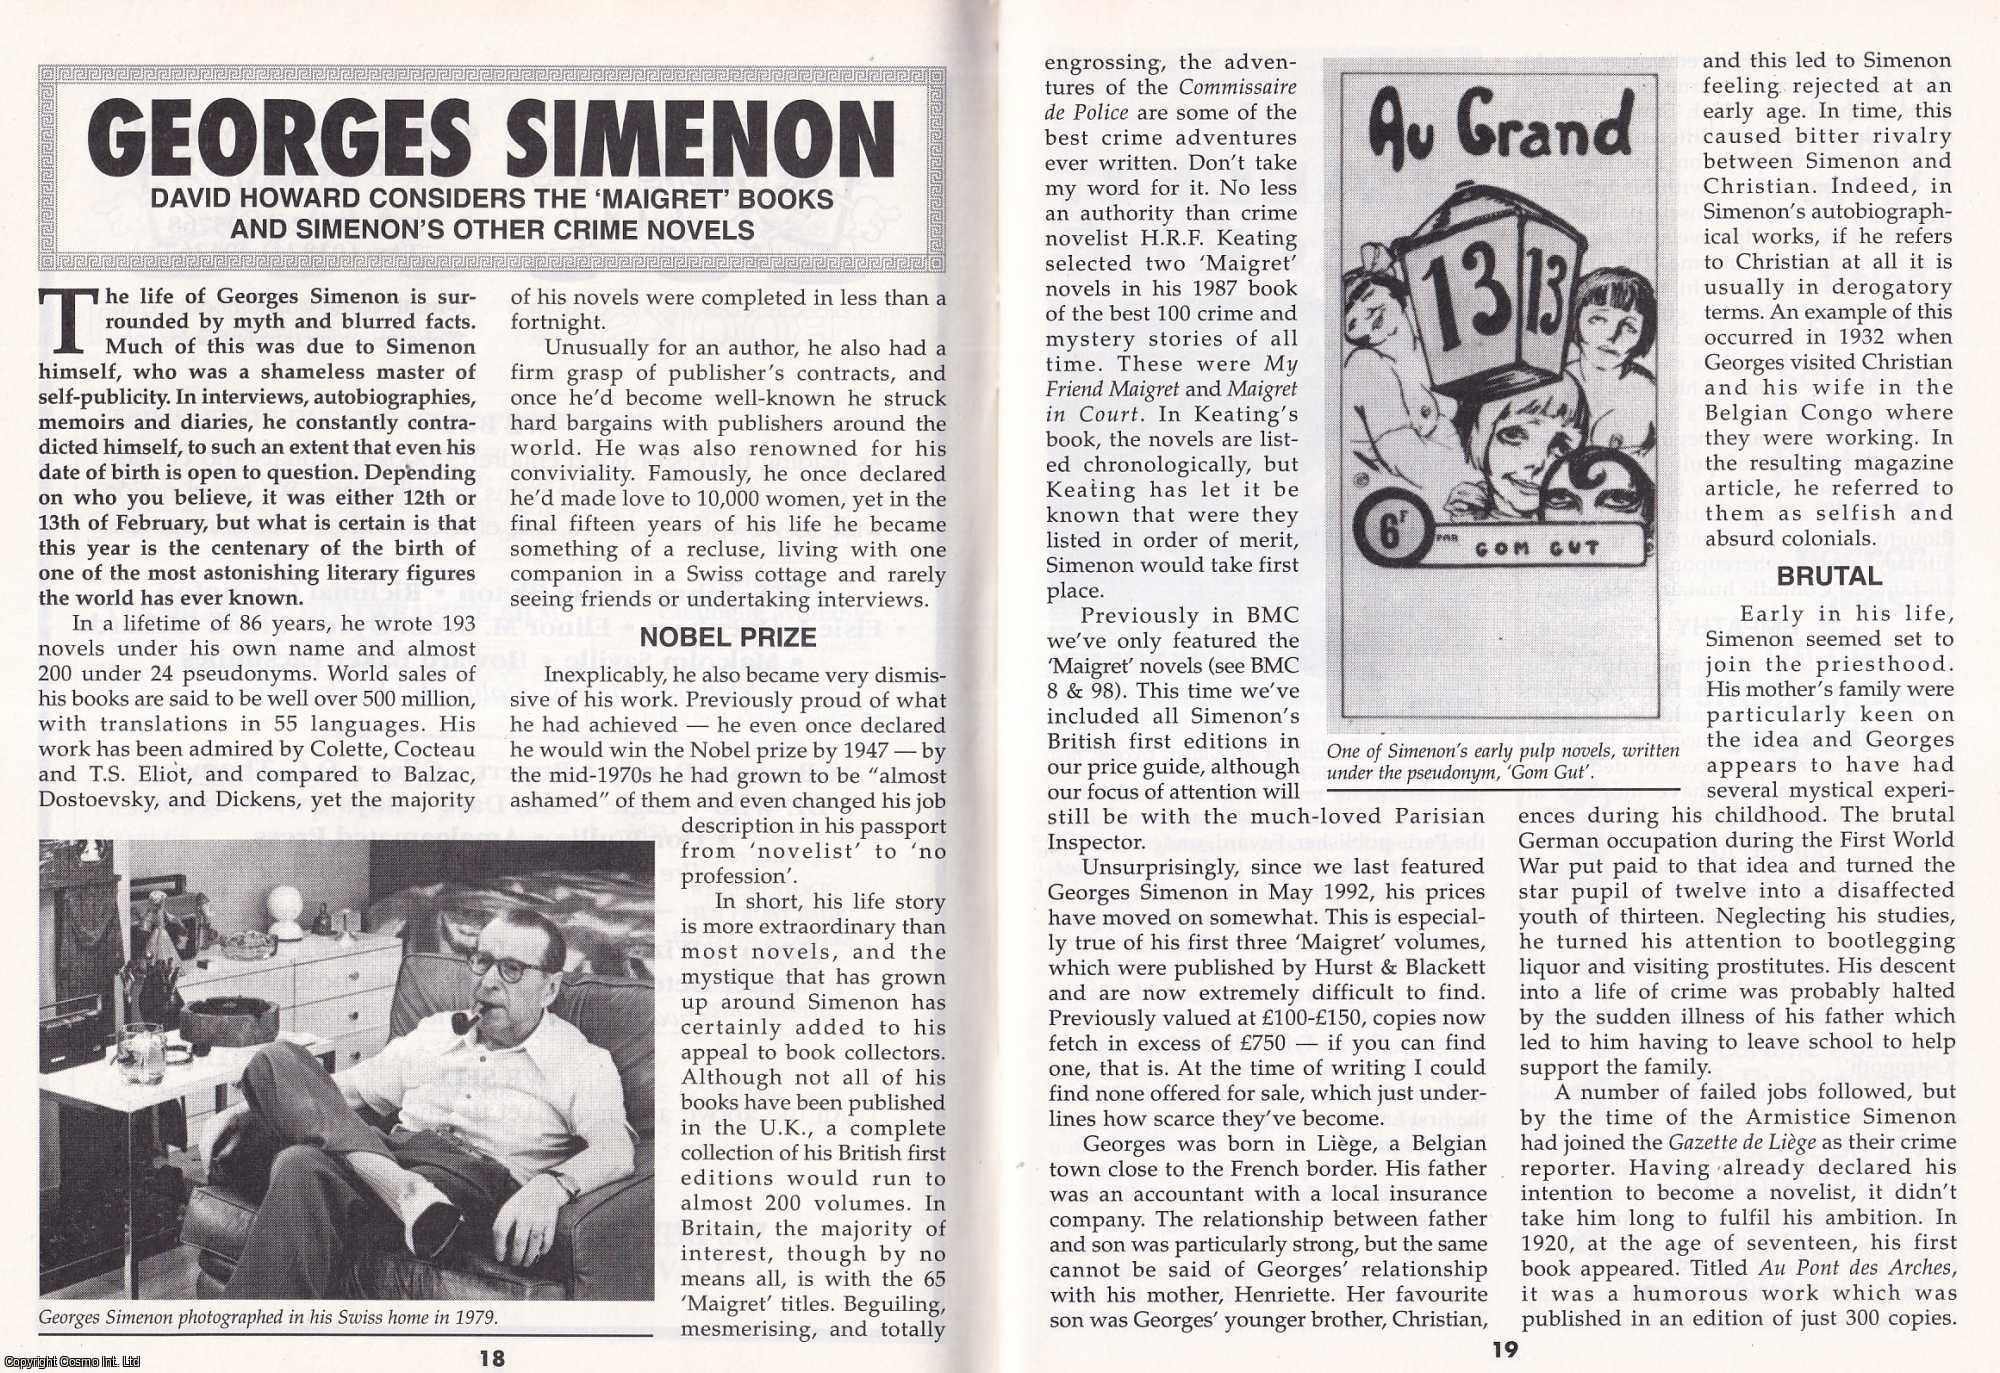 David Howard - Georges Simenon : The Maigret Books and Simenon's Other Crime Novels. This is an original article separated from an issue of The Book & Magazine Collector publication, 2003.